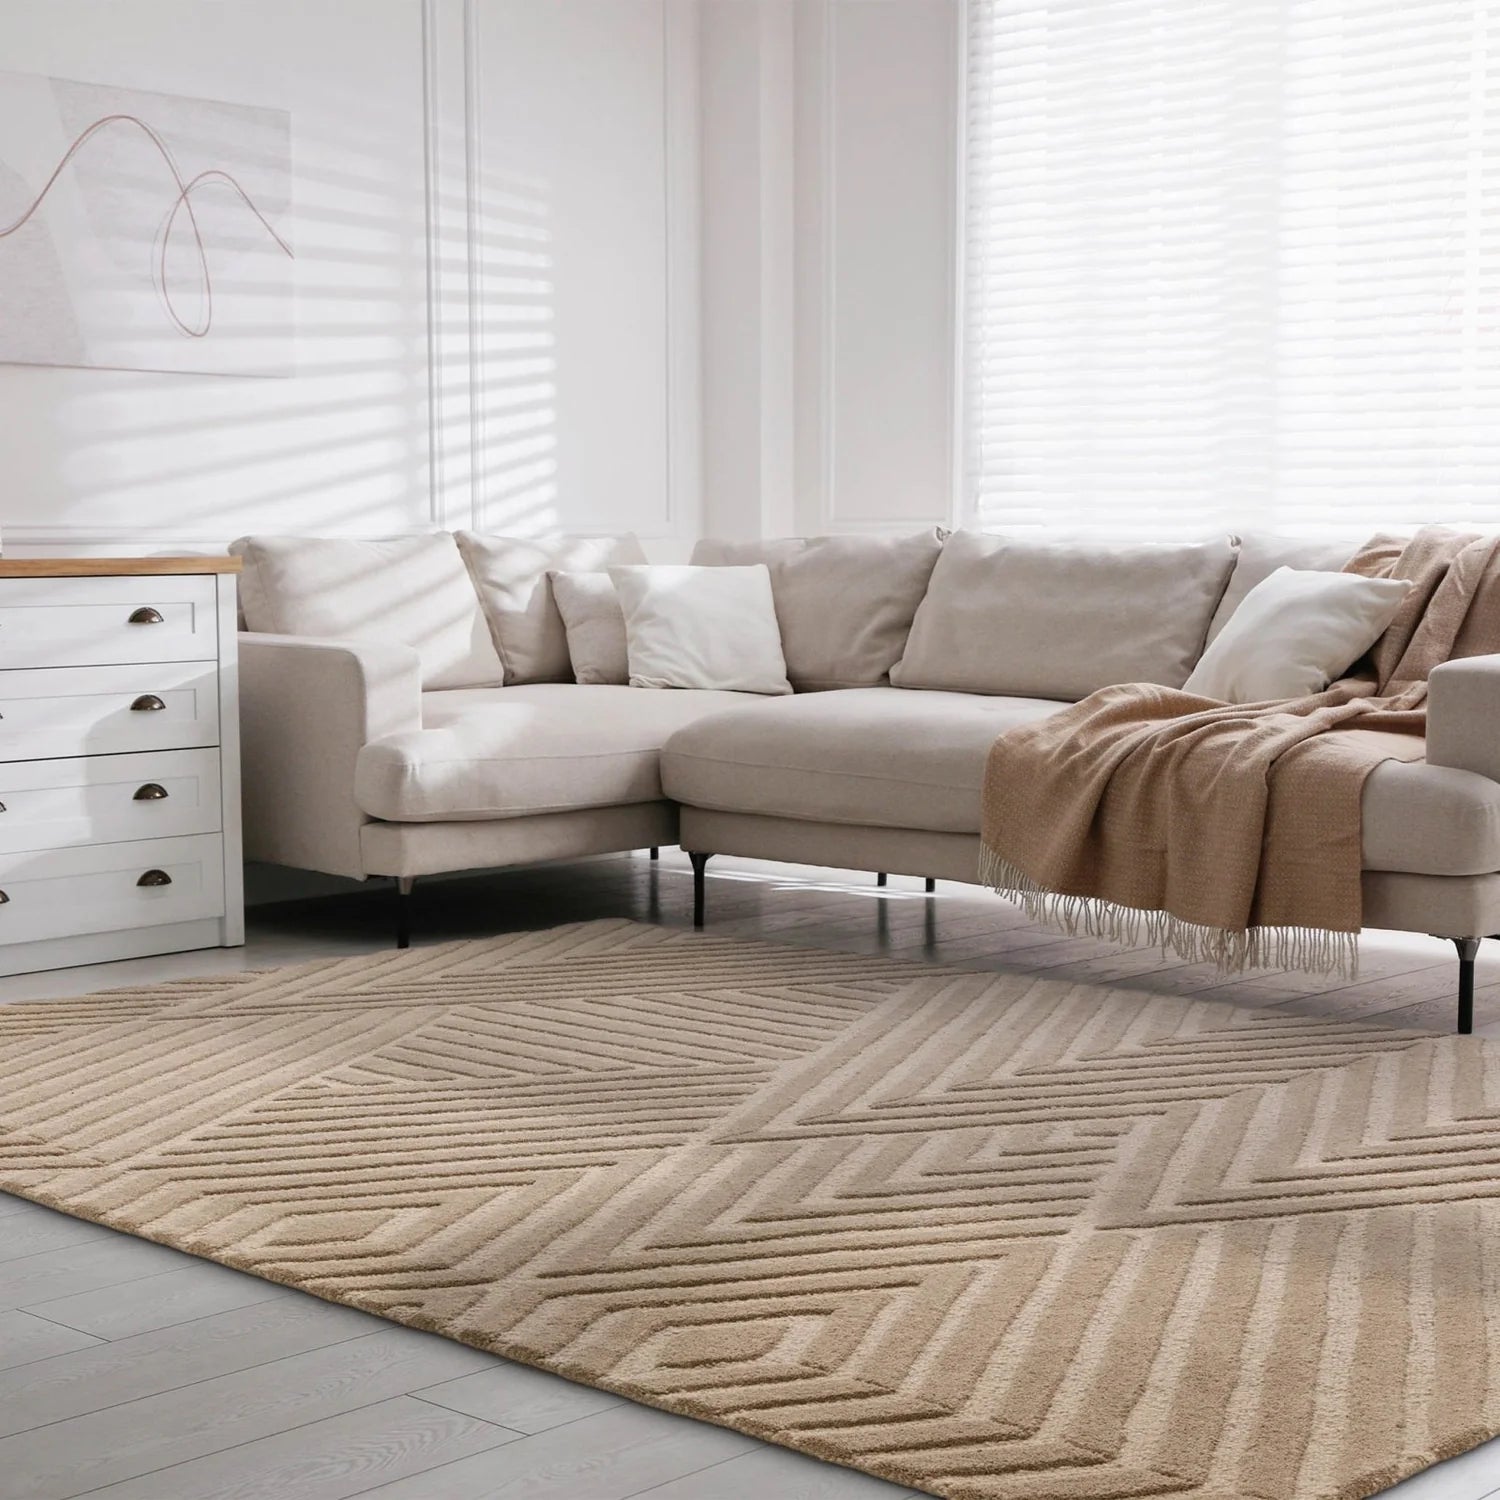 Taupe Rugs